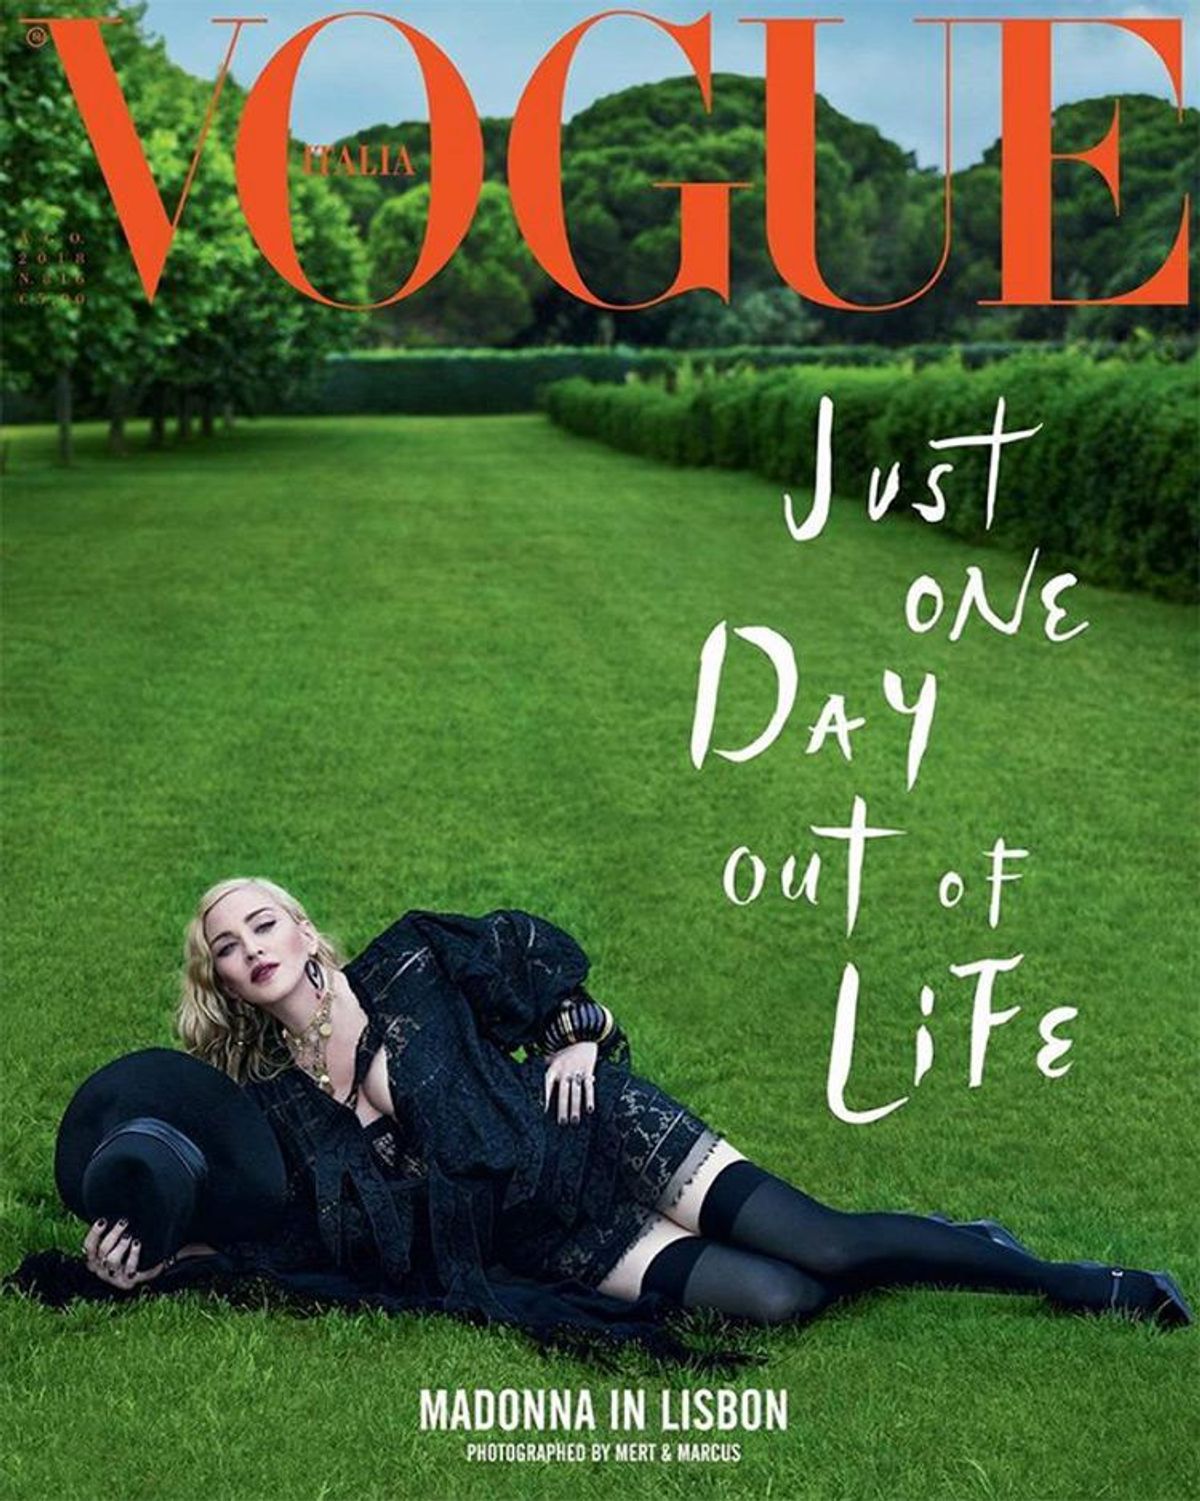 Madonna Looks as Stunning as Ever Gracing the Cover of Vogue Italia